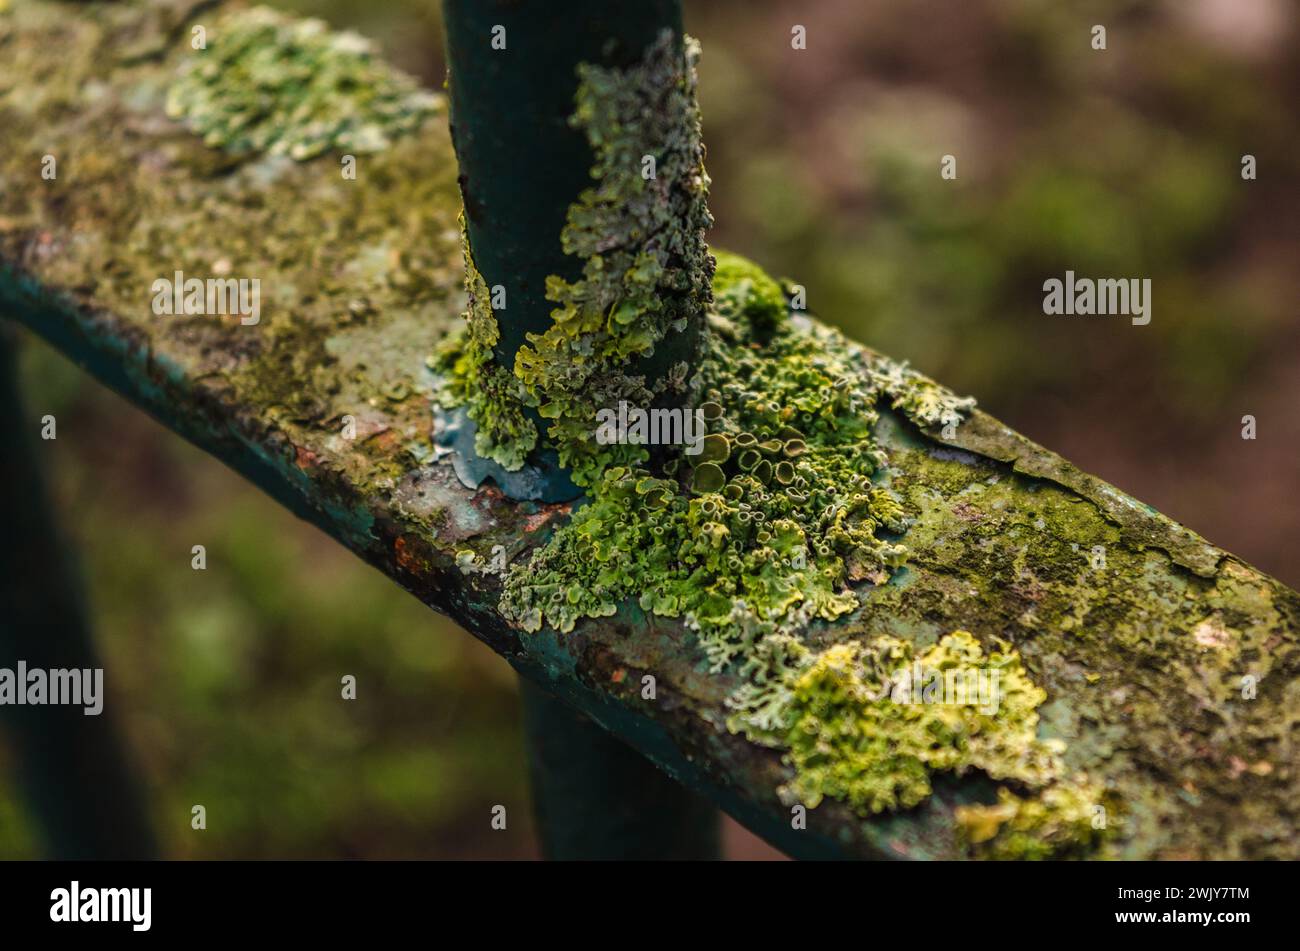 Close-up of an old rusted fence covered in algae and miniature fungus Stock Photo